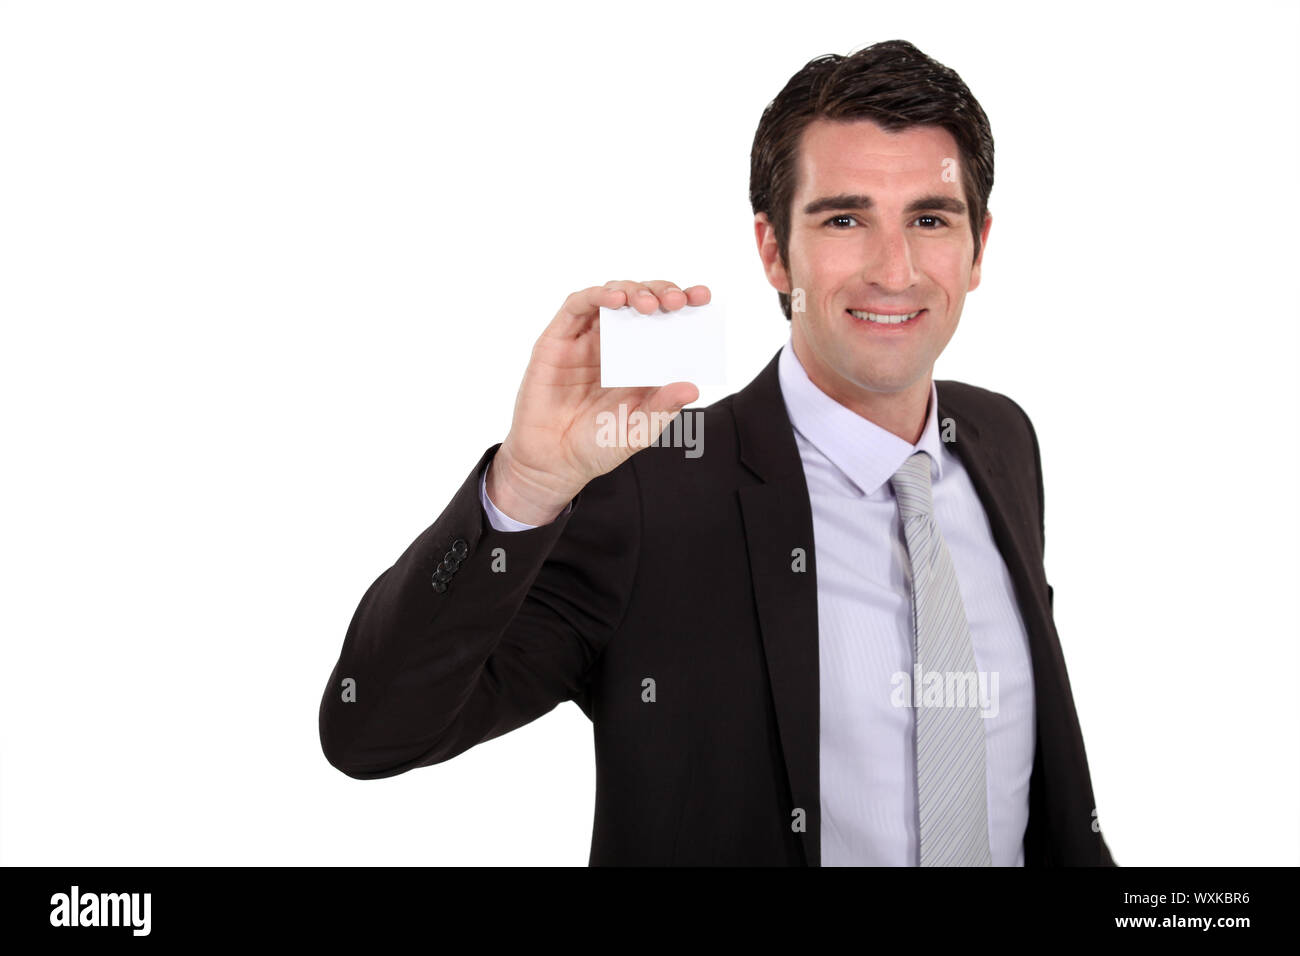 Businessman holding up his business card Stock Photo